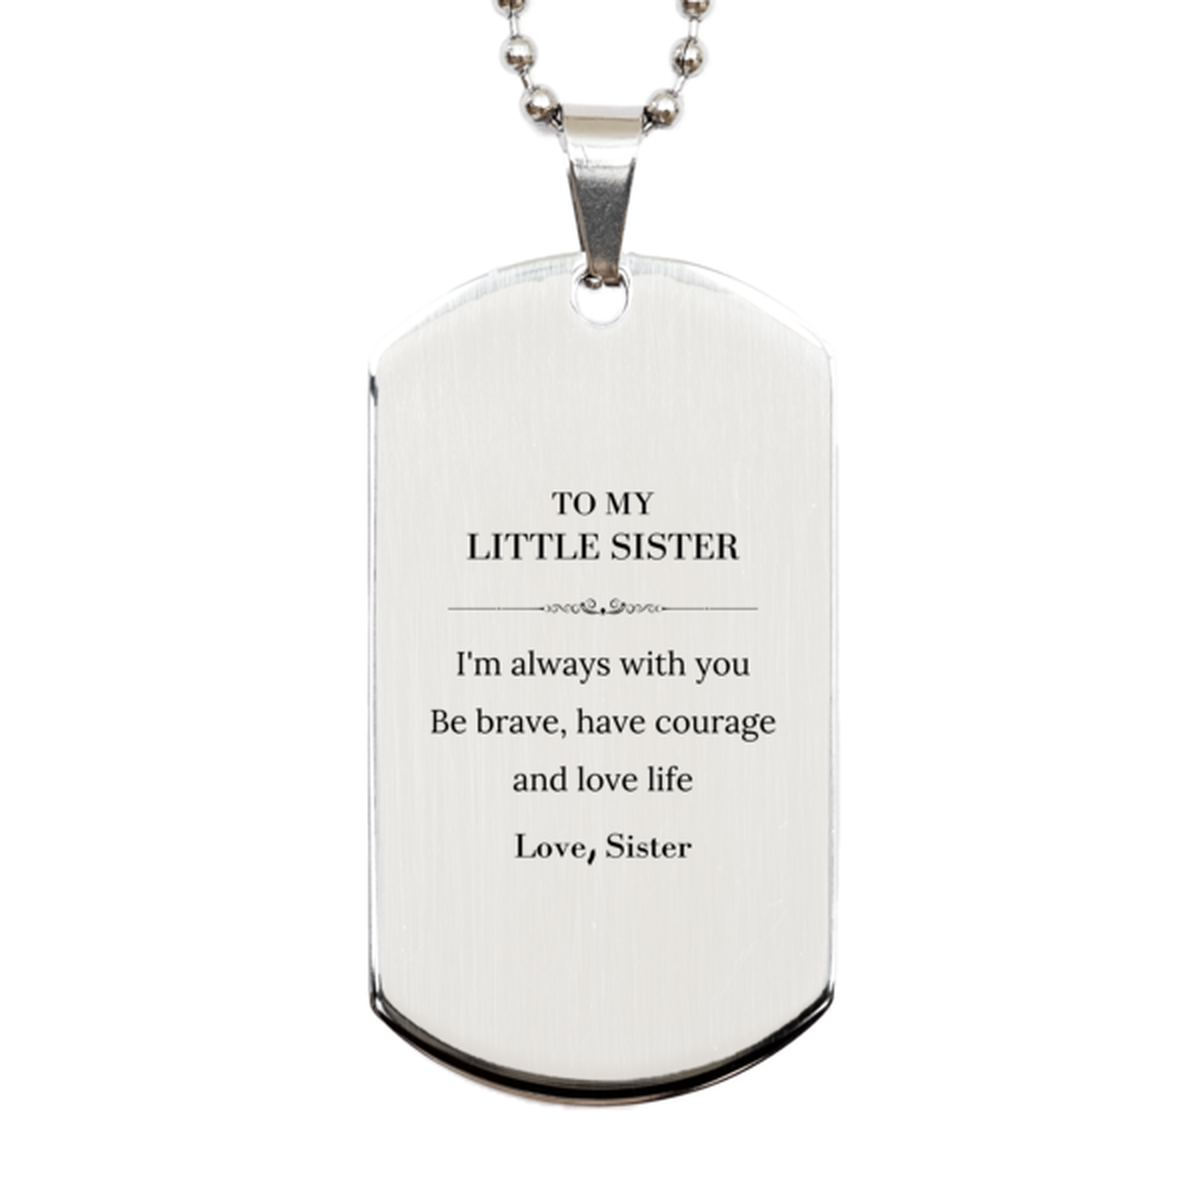 To My Little Sister Gifts from Sister, Unique Silver Dog Tag Inspirational Christmas Birthday Graduation Gifts for Little Sister I'm always with you. Be brave, have courage and love life. Love, Sister